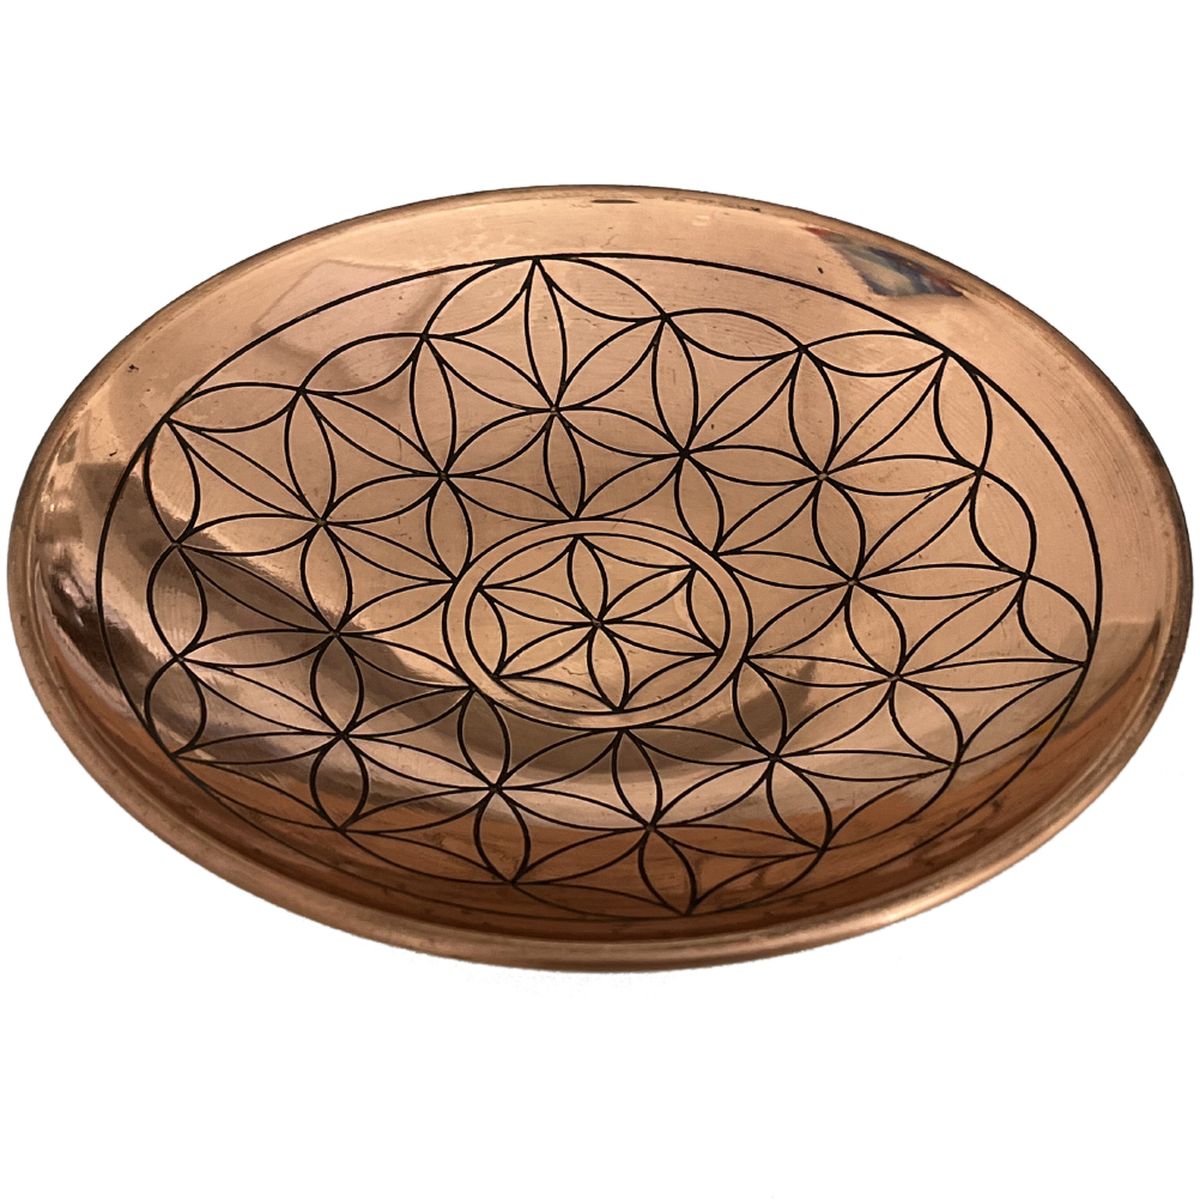 Copper plate with flower of life design